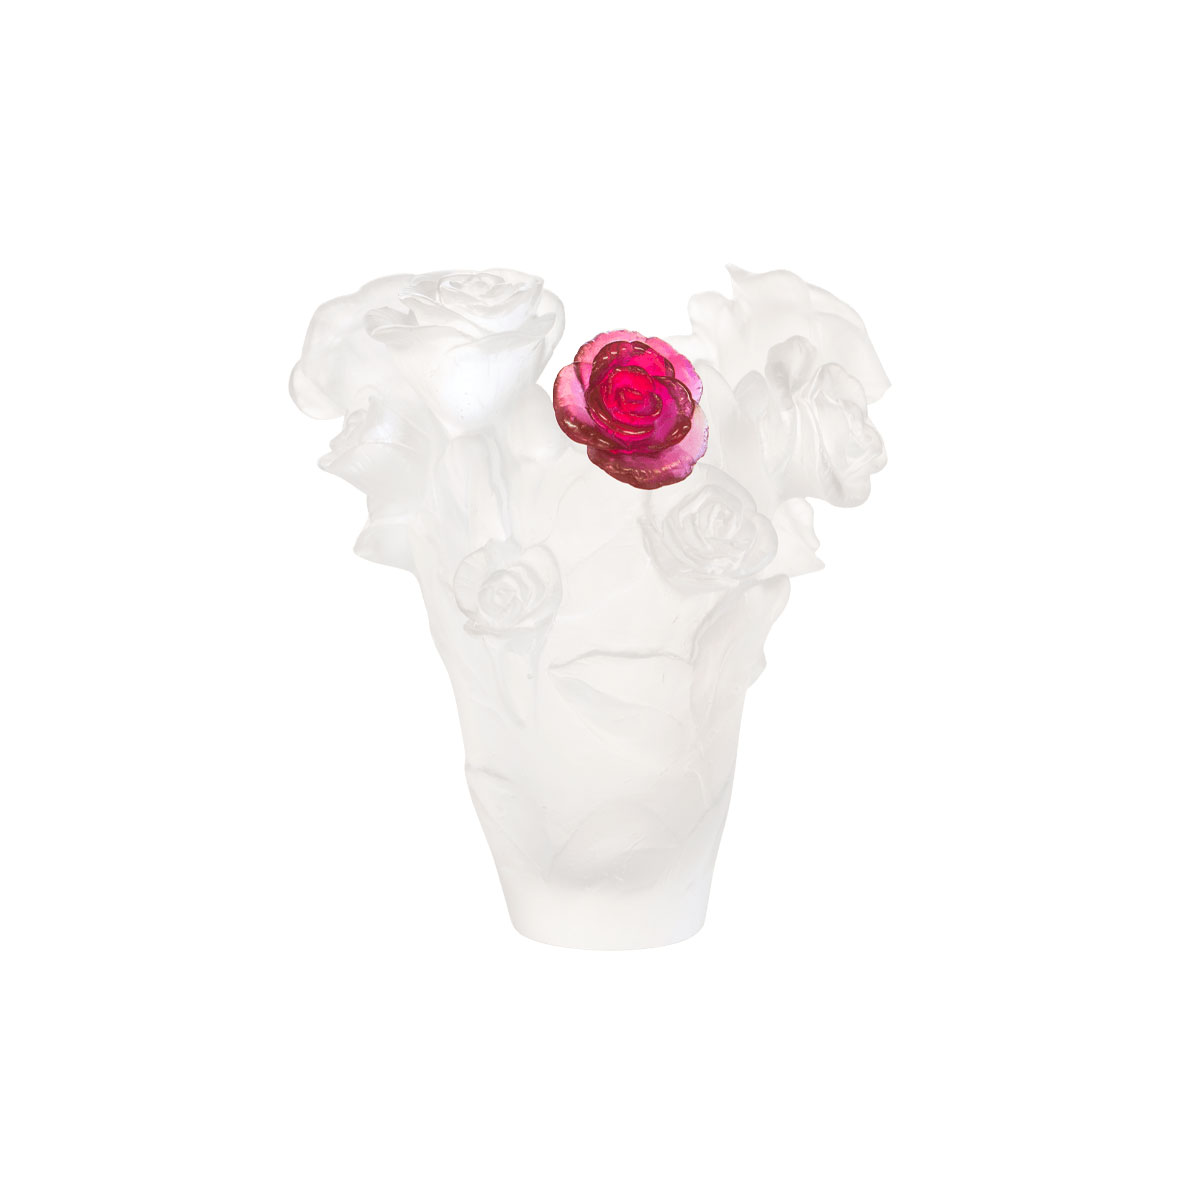 Daum Small Rose Passion Vase in White with Red Flower